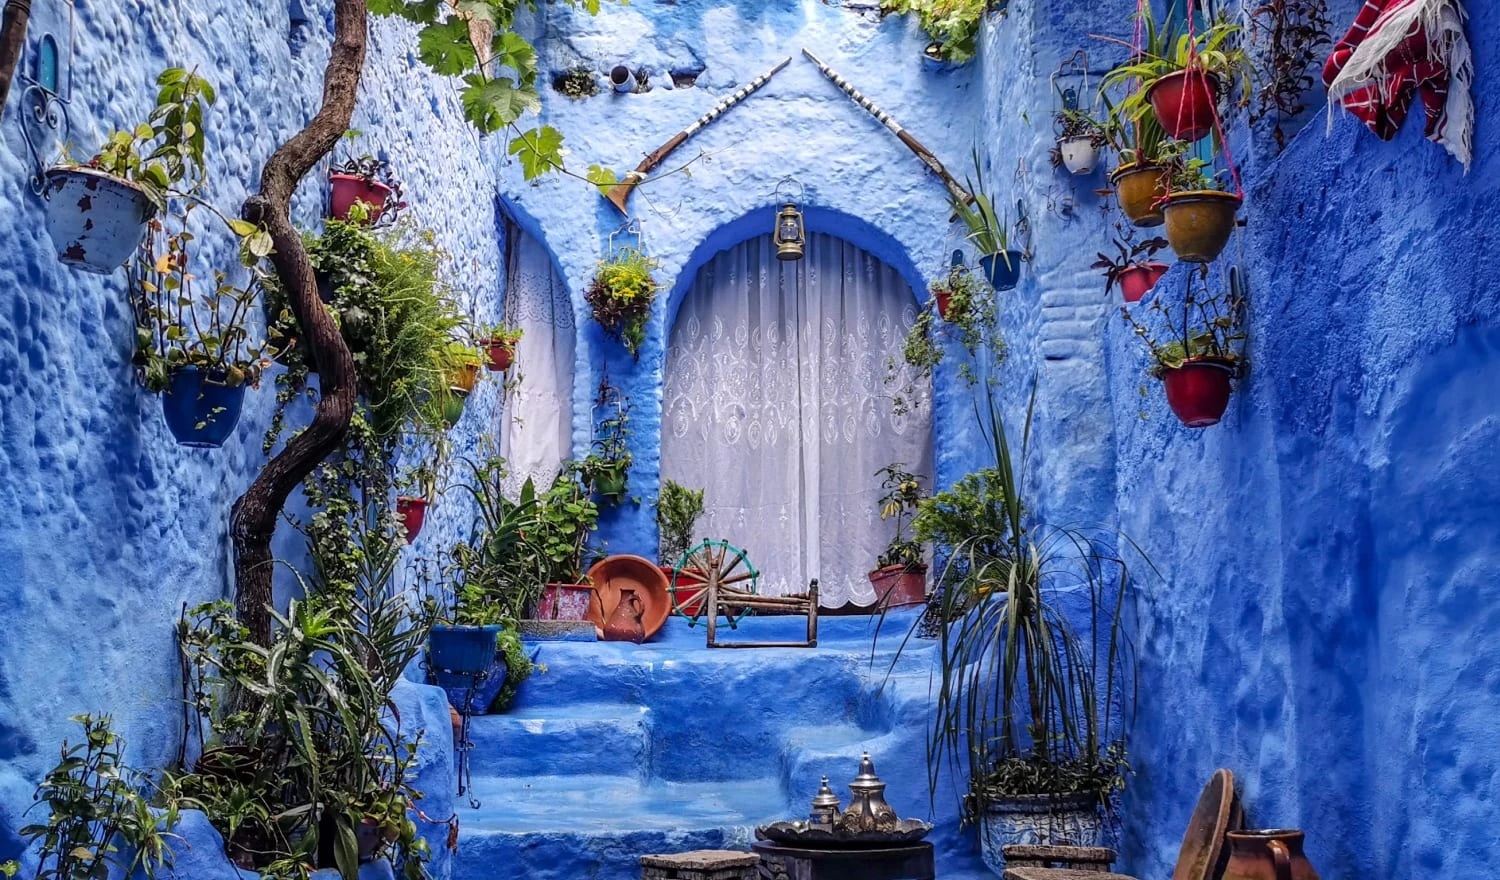 The world-famous blue-painted buildings of Chefchaouen, Morocco.